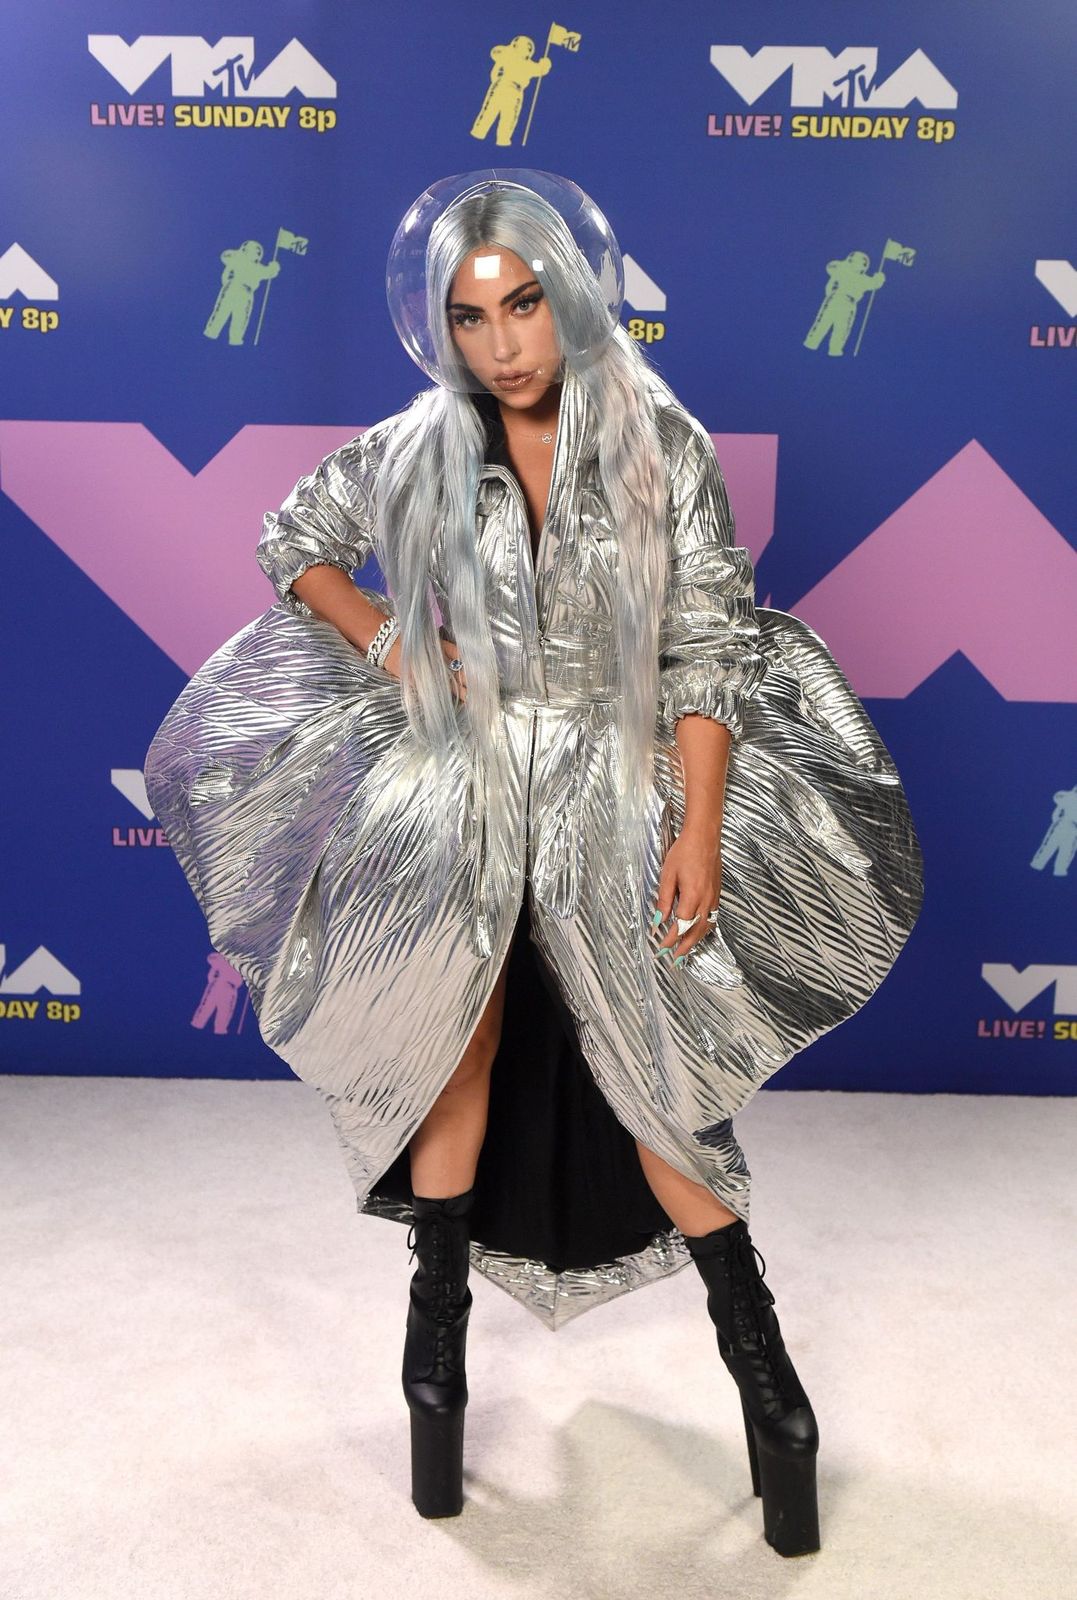 Lady Gaga at the 2020 MTV Video Music Awards, aired on Sunday, August 30th 2020.| Getty Images